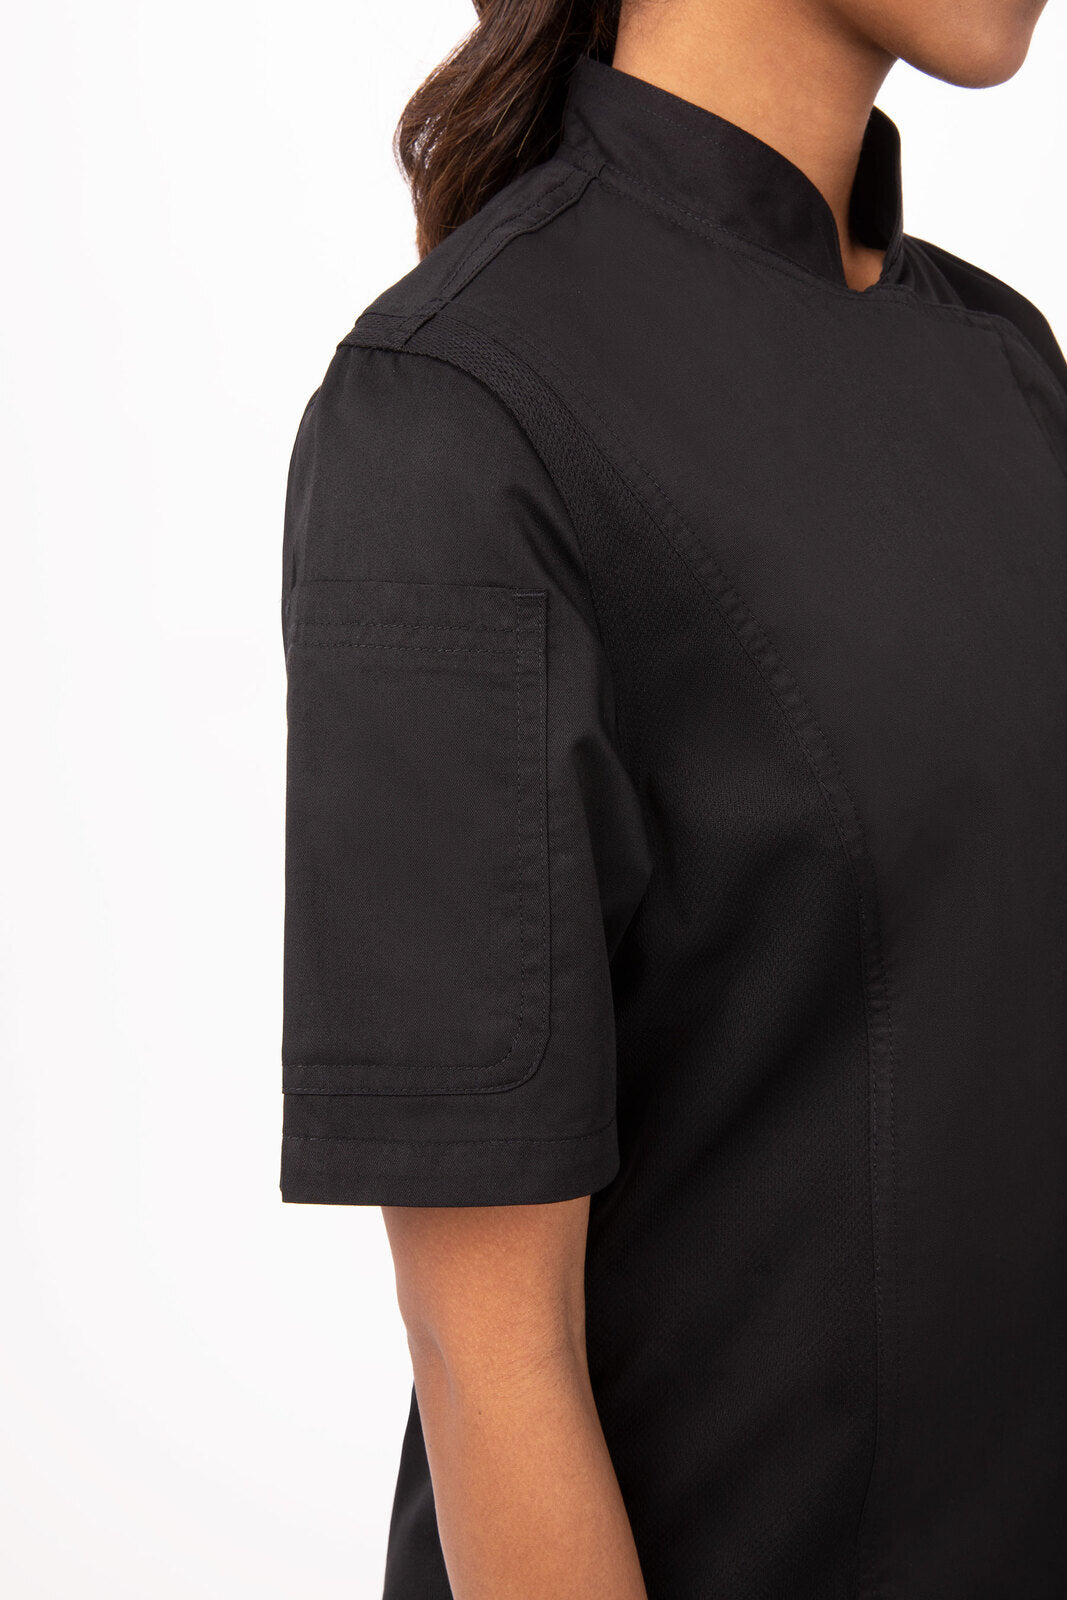 Chef Works - Springfield Chef Jacket